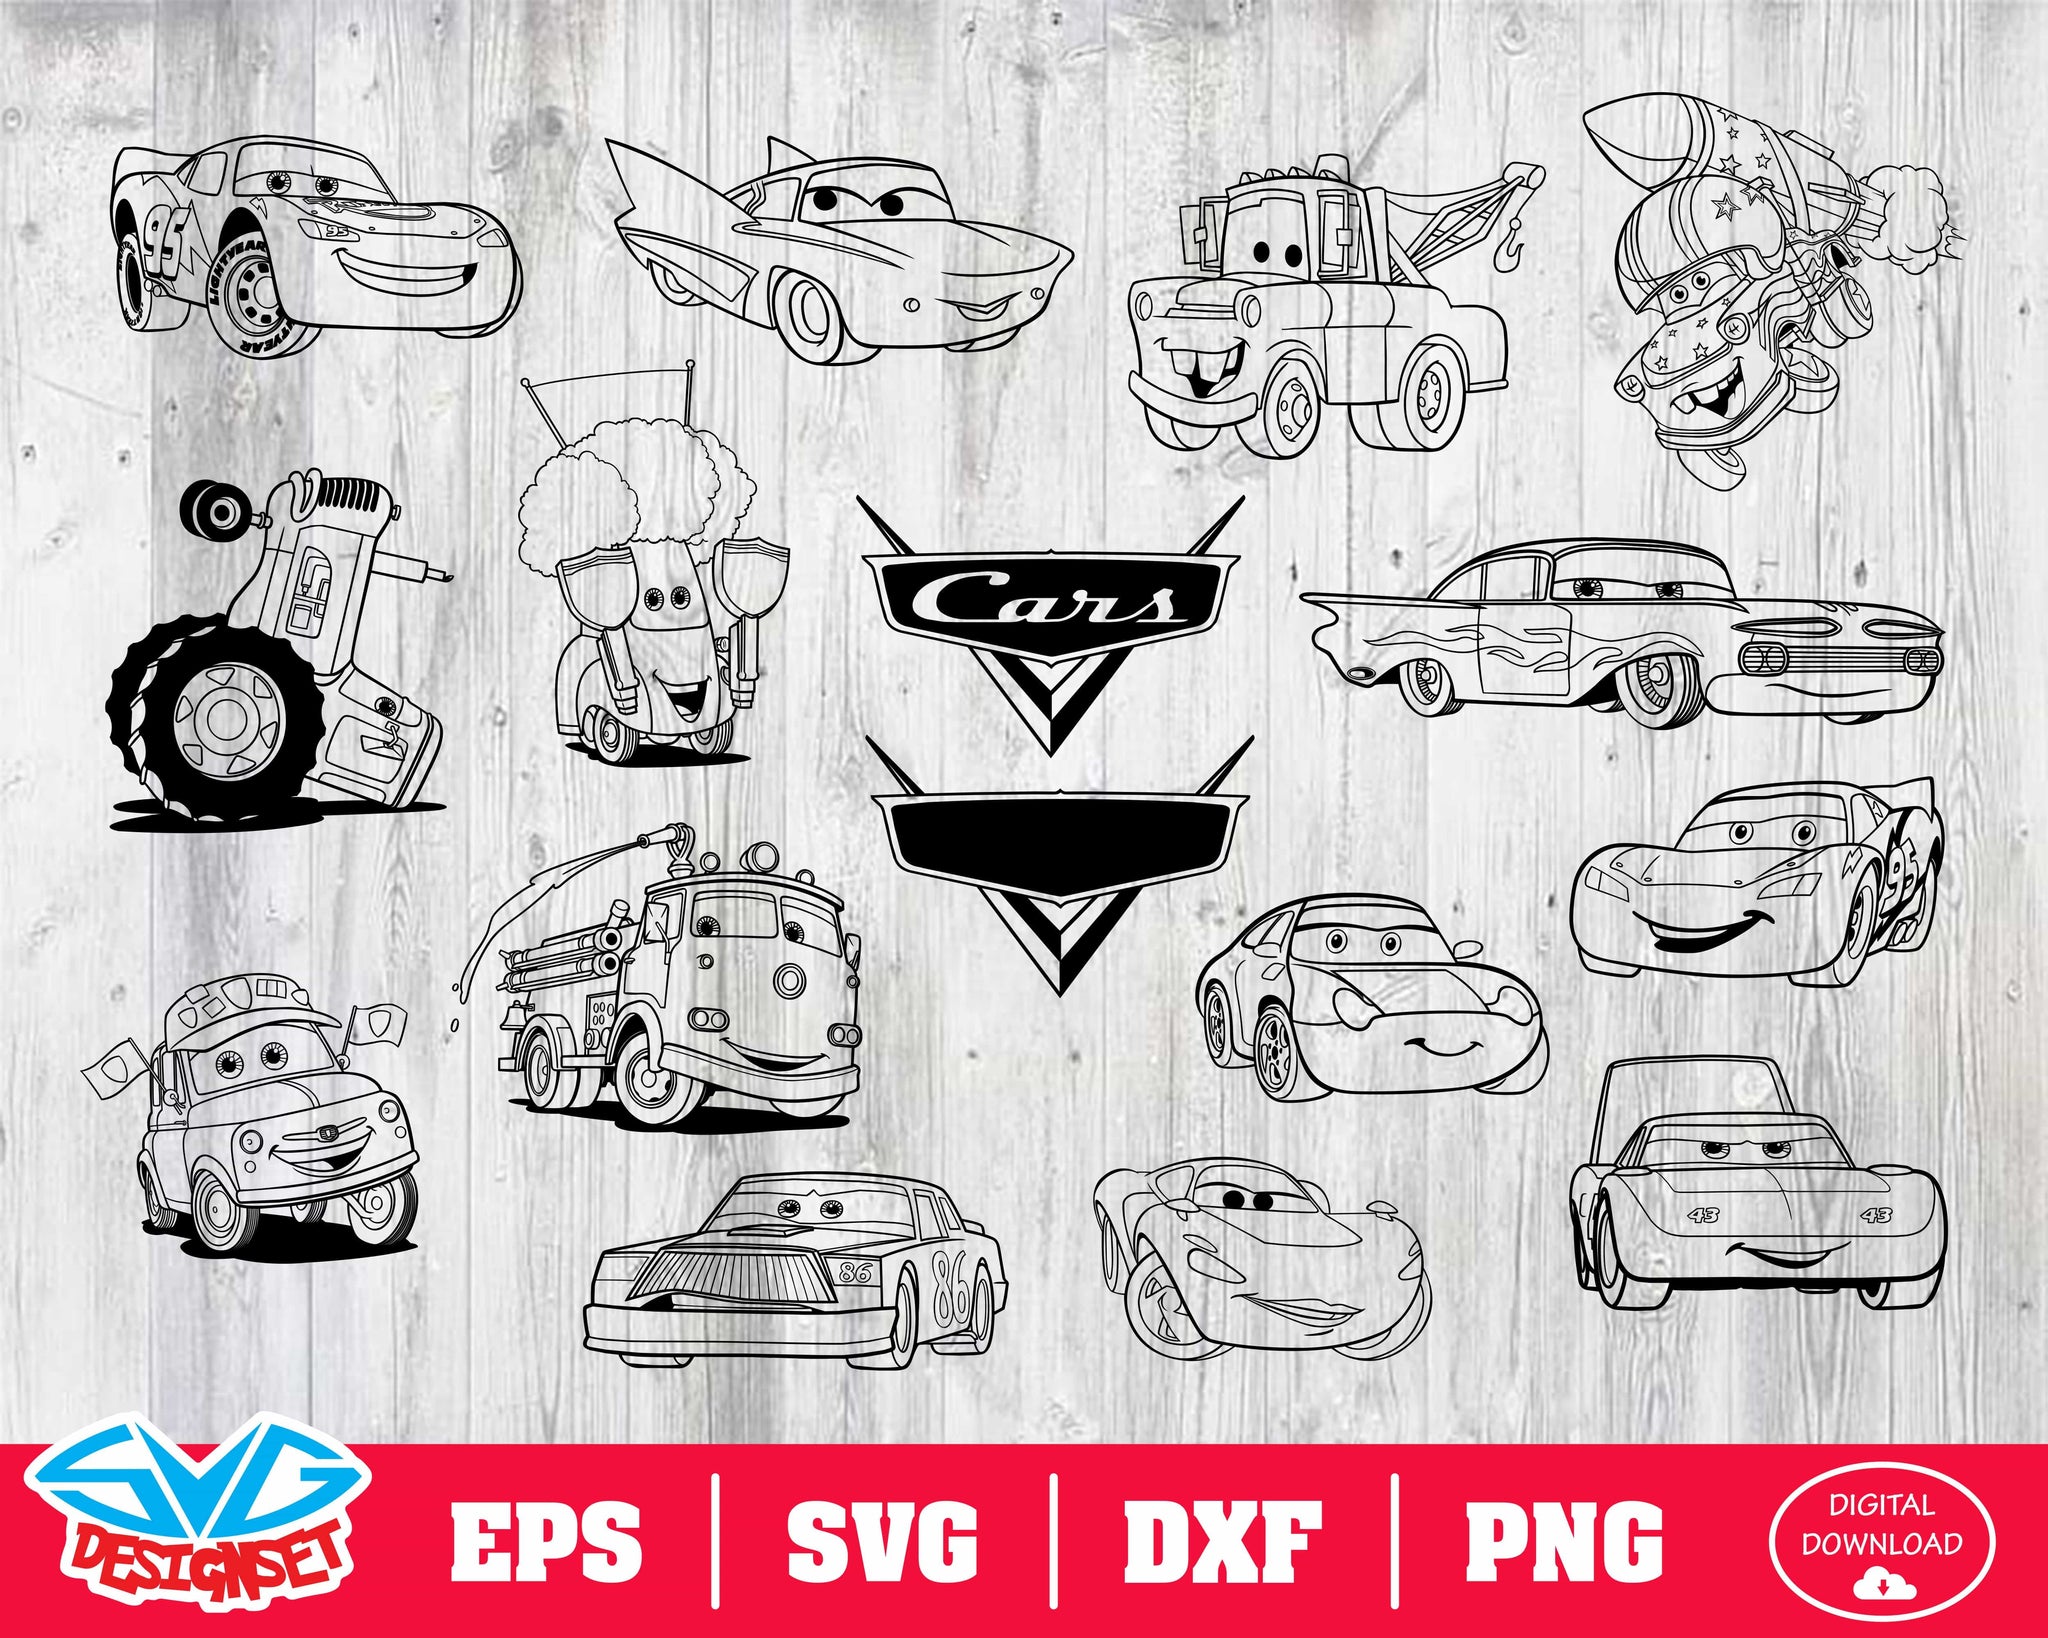 Disney cars Svg Dxf, Eps, Png, Clipar, Silhouette and Cutfiles #2 - SVGDesignSets